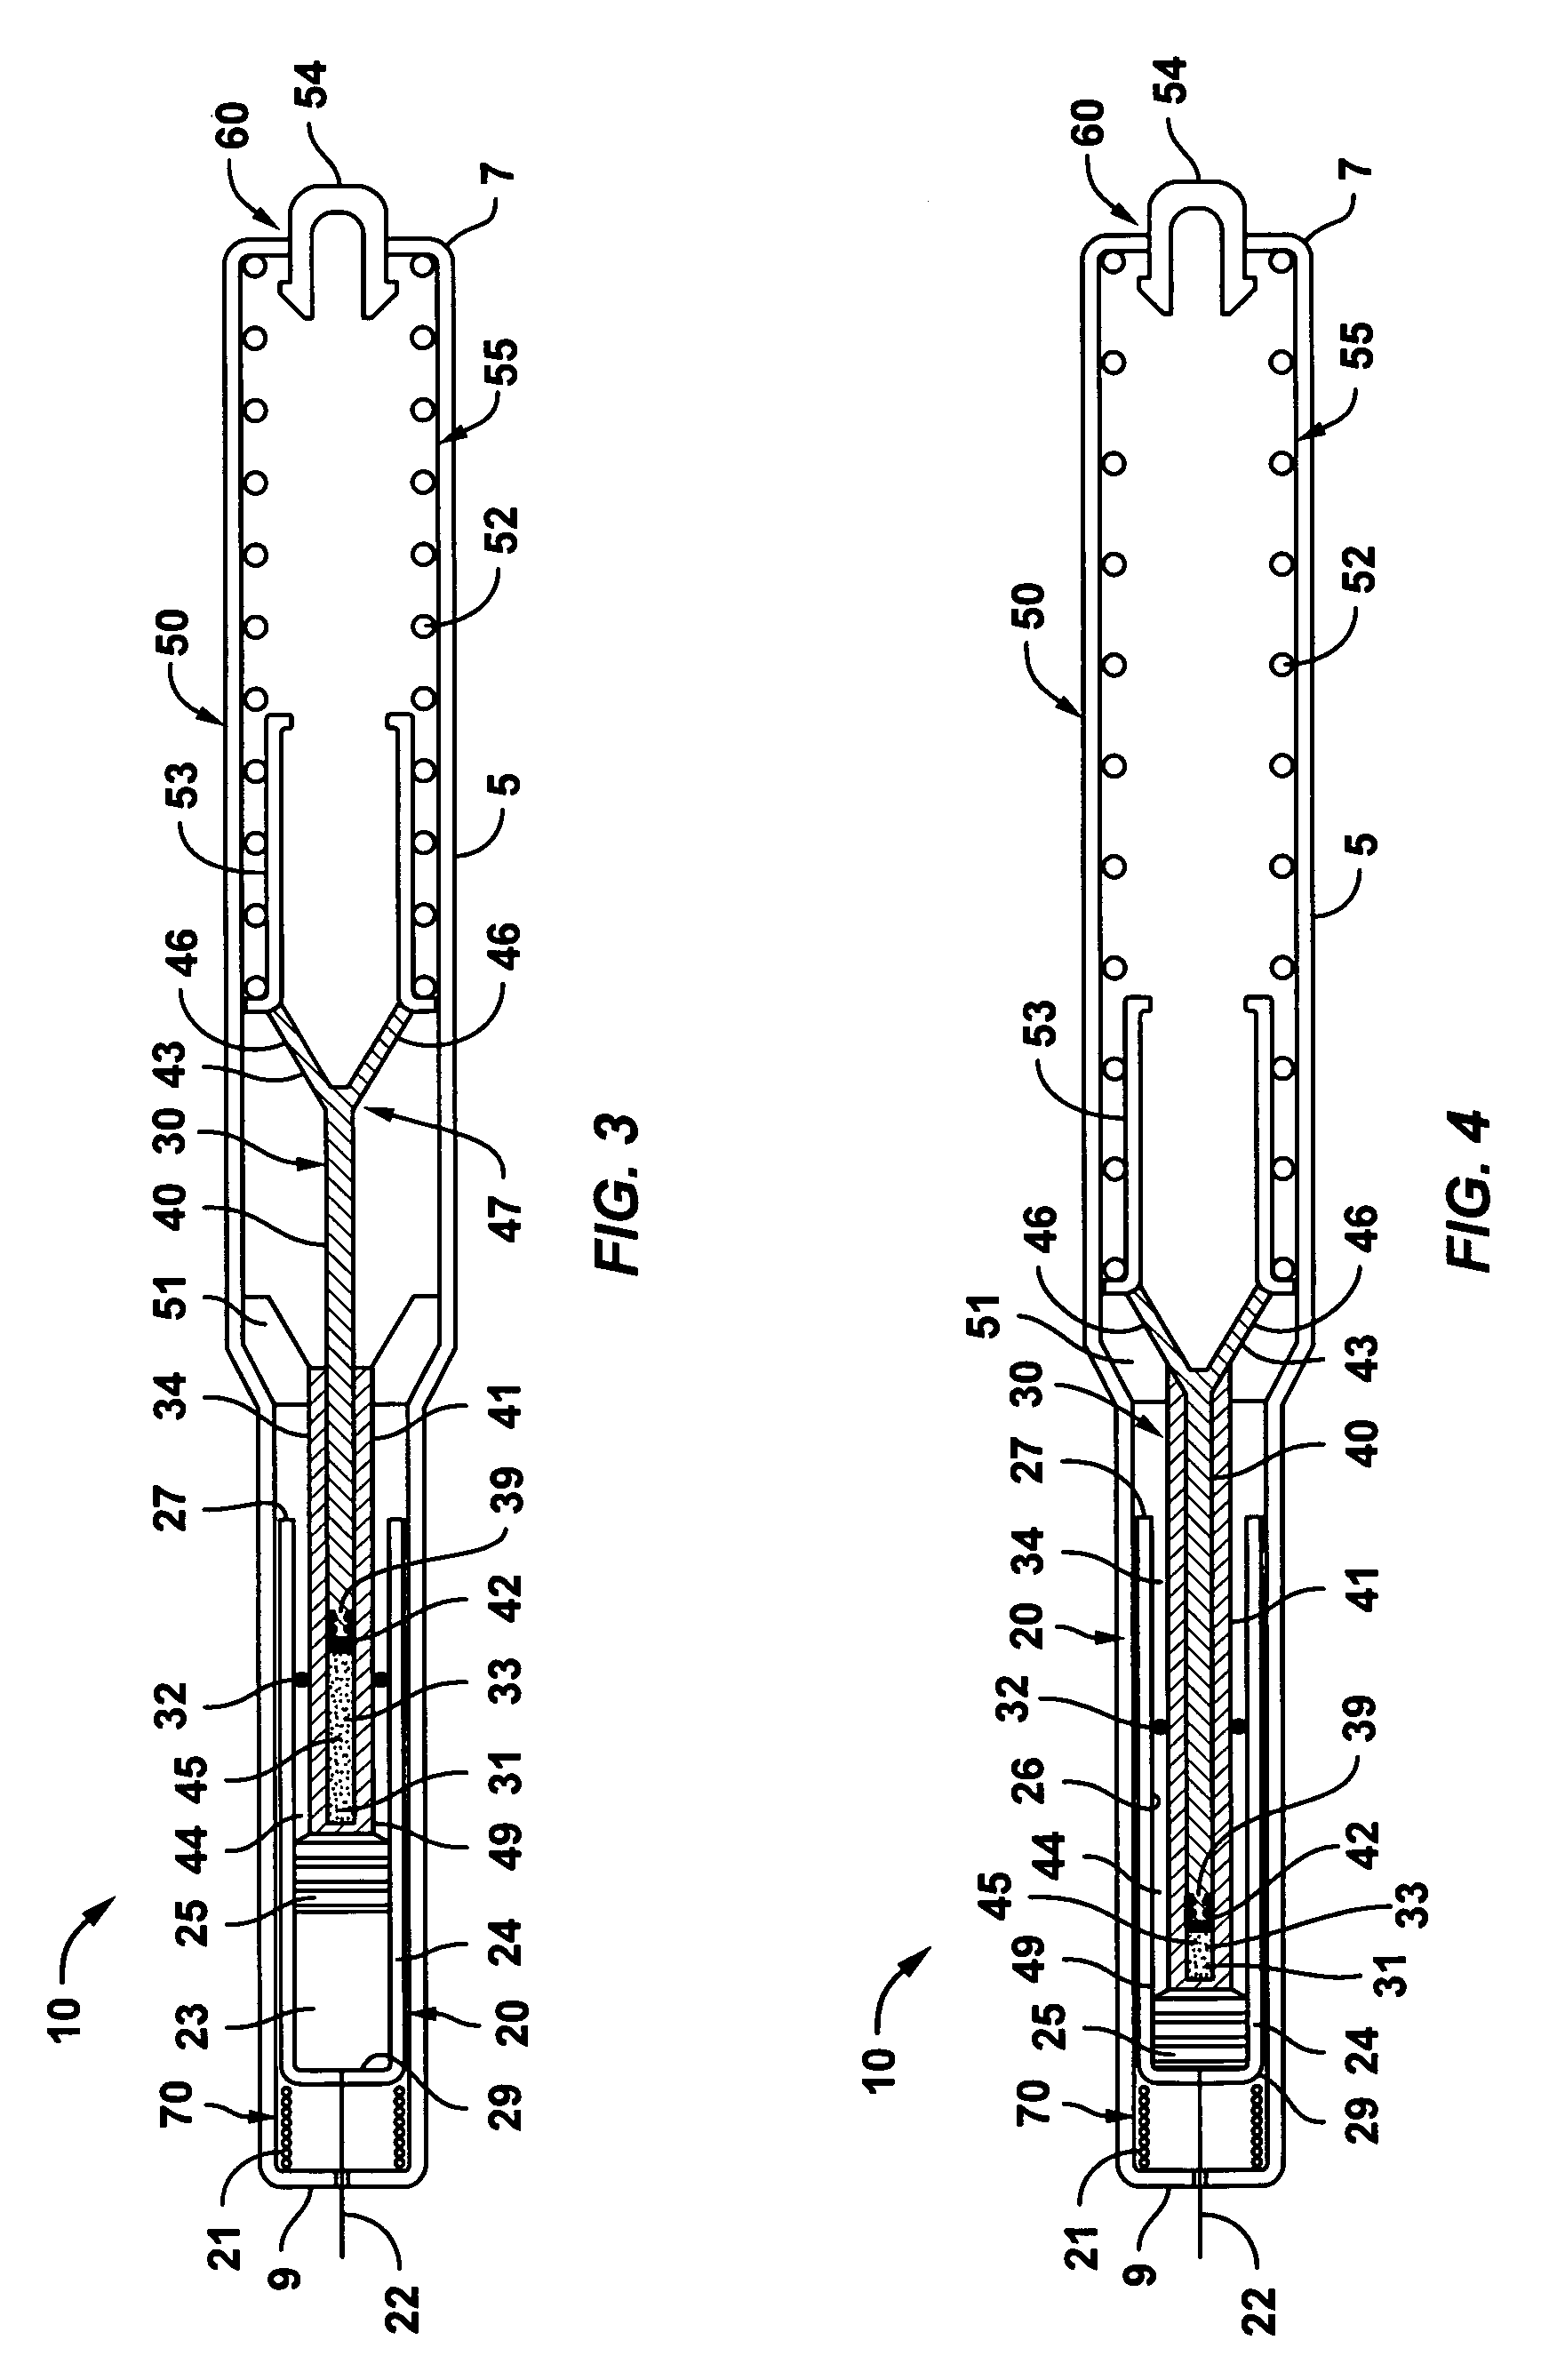 Injection device providing automatic needle retraction